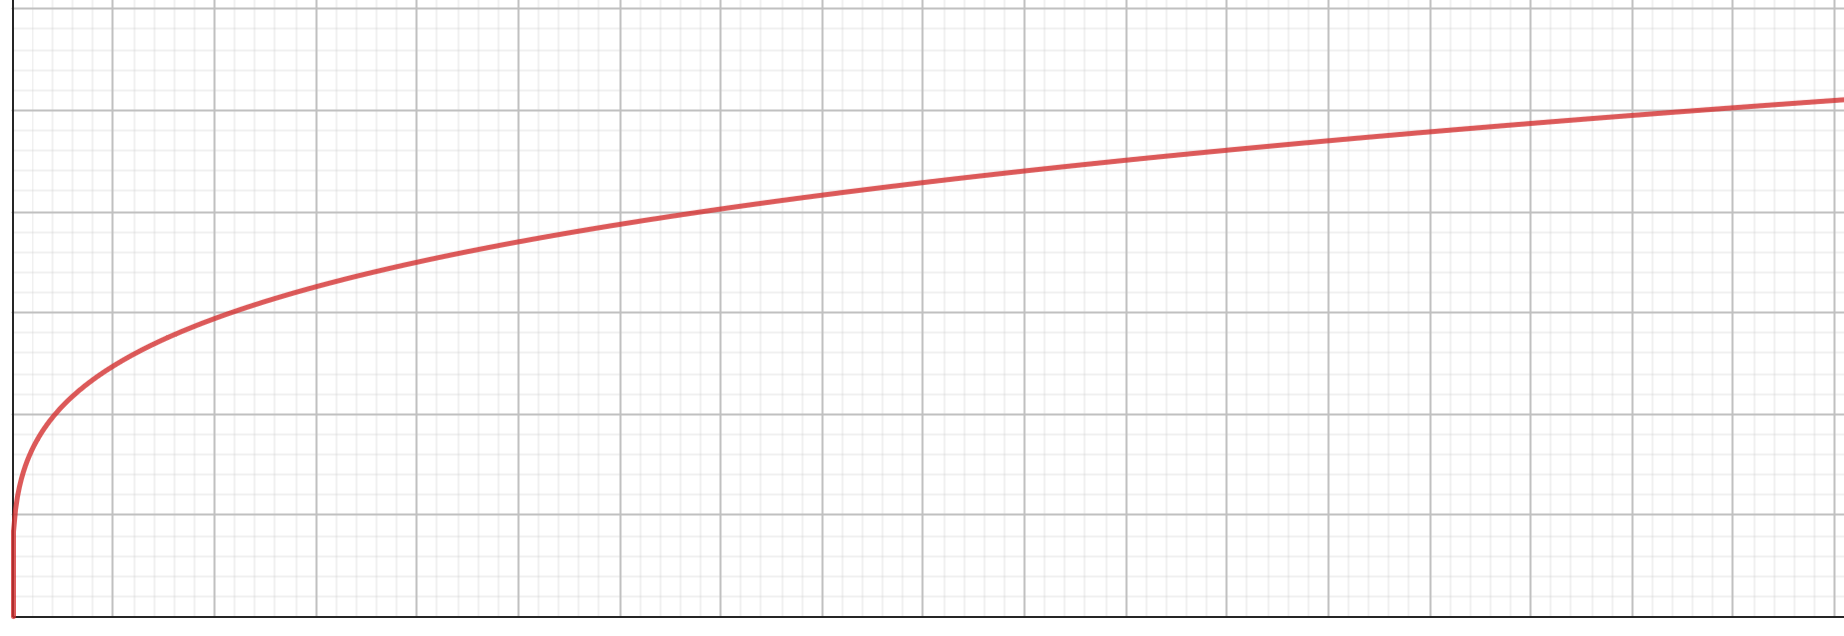 A graph of y=x^p where p < 1, in the range of 0 to 1.